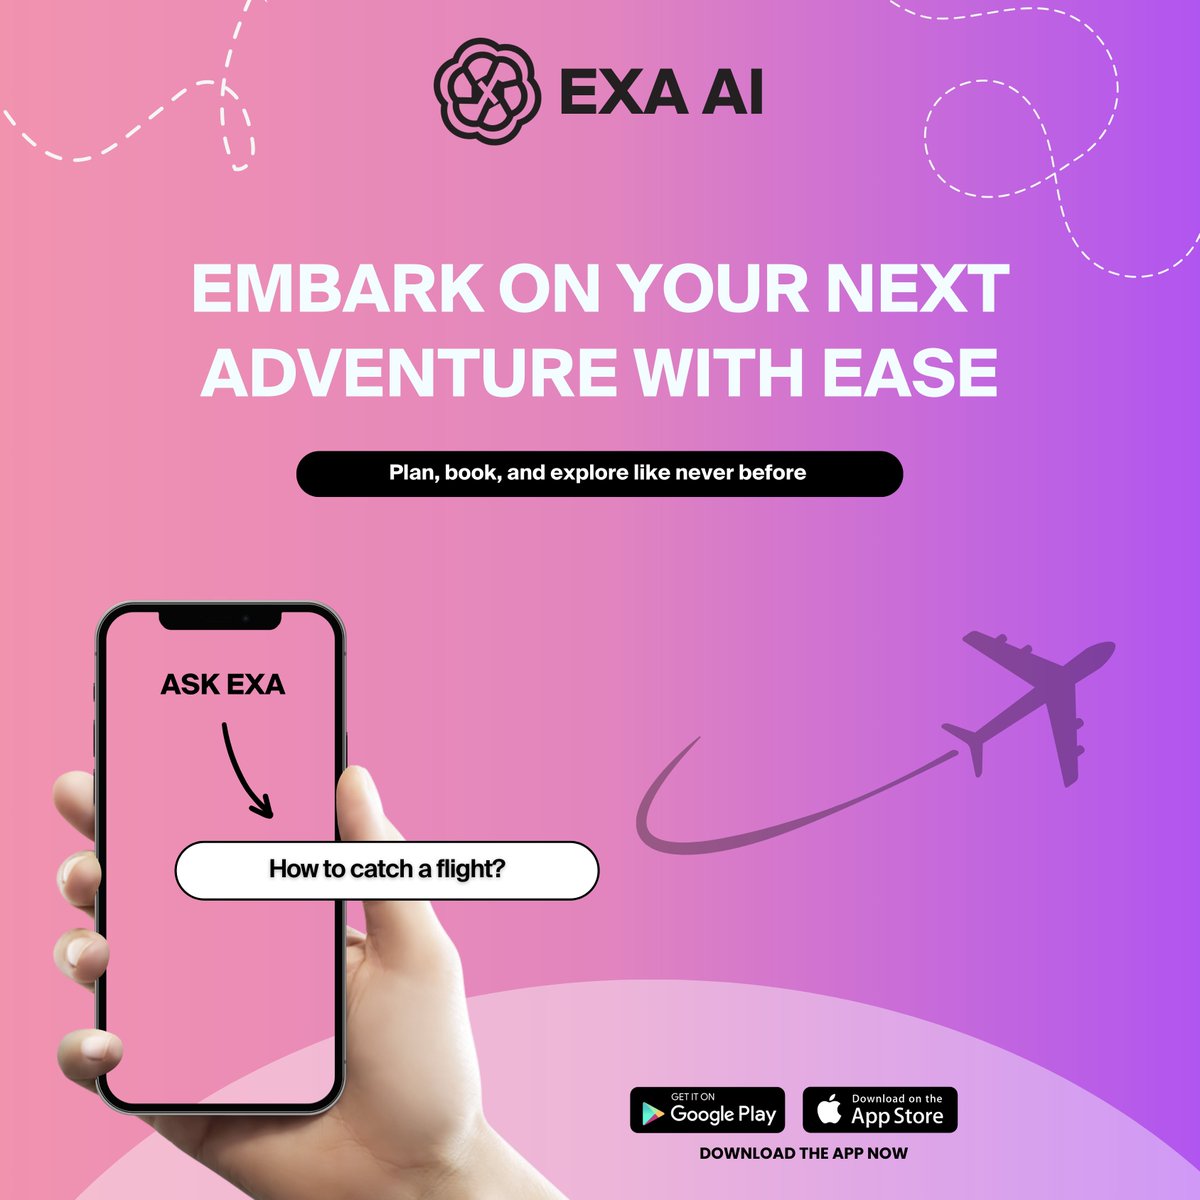 Explore the world hassle-free with Travel Bot by EXA AI Chat! ✈️ 
.
#AIAssistant #CustomerEngagement #FutureOfCommunication #aichat #TechTrends #ConversationalAI #Chatbot #SmartChat #AIChatbot #ExaAIChat